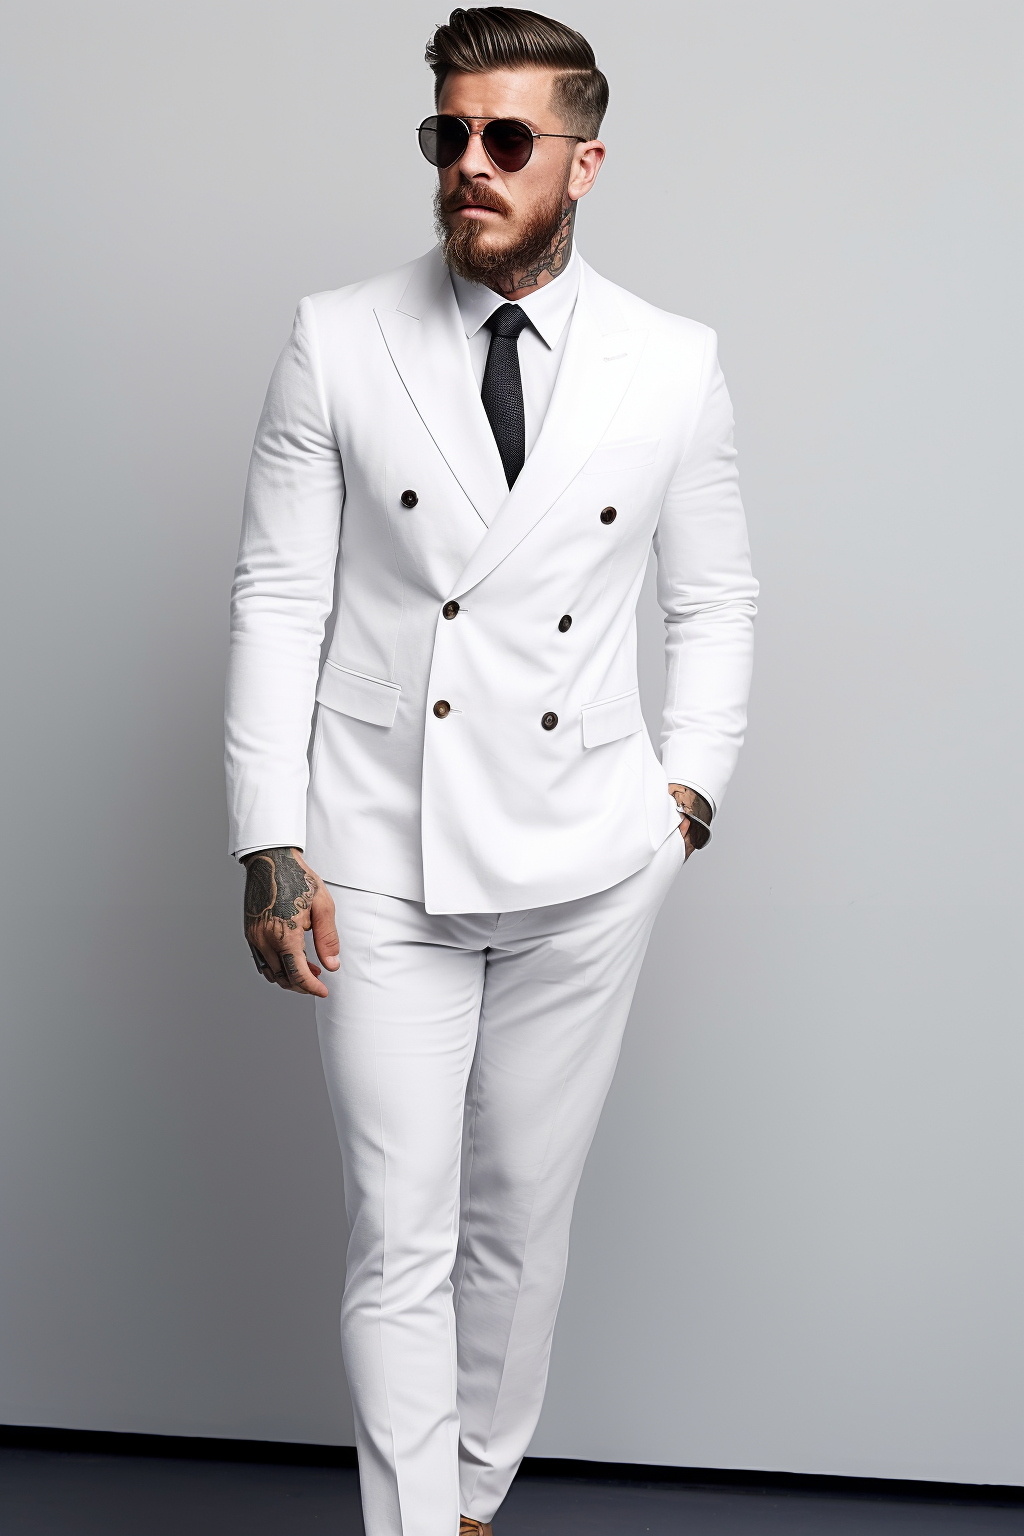 Men's Luxury White Double-Breasted Suit - Classic Two-Piece Formal Wear - Premium Tailored Fit Ensemble